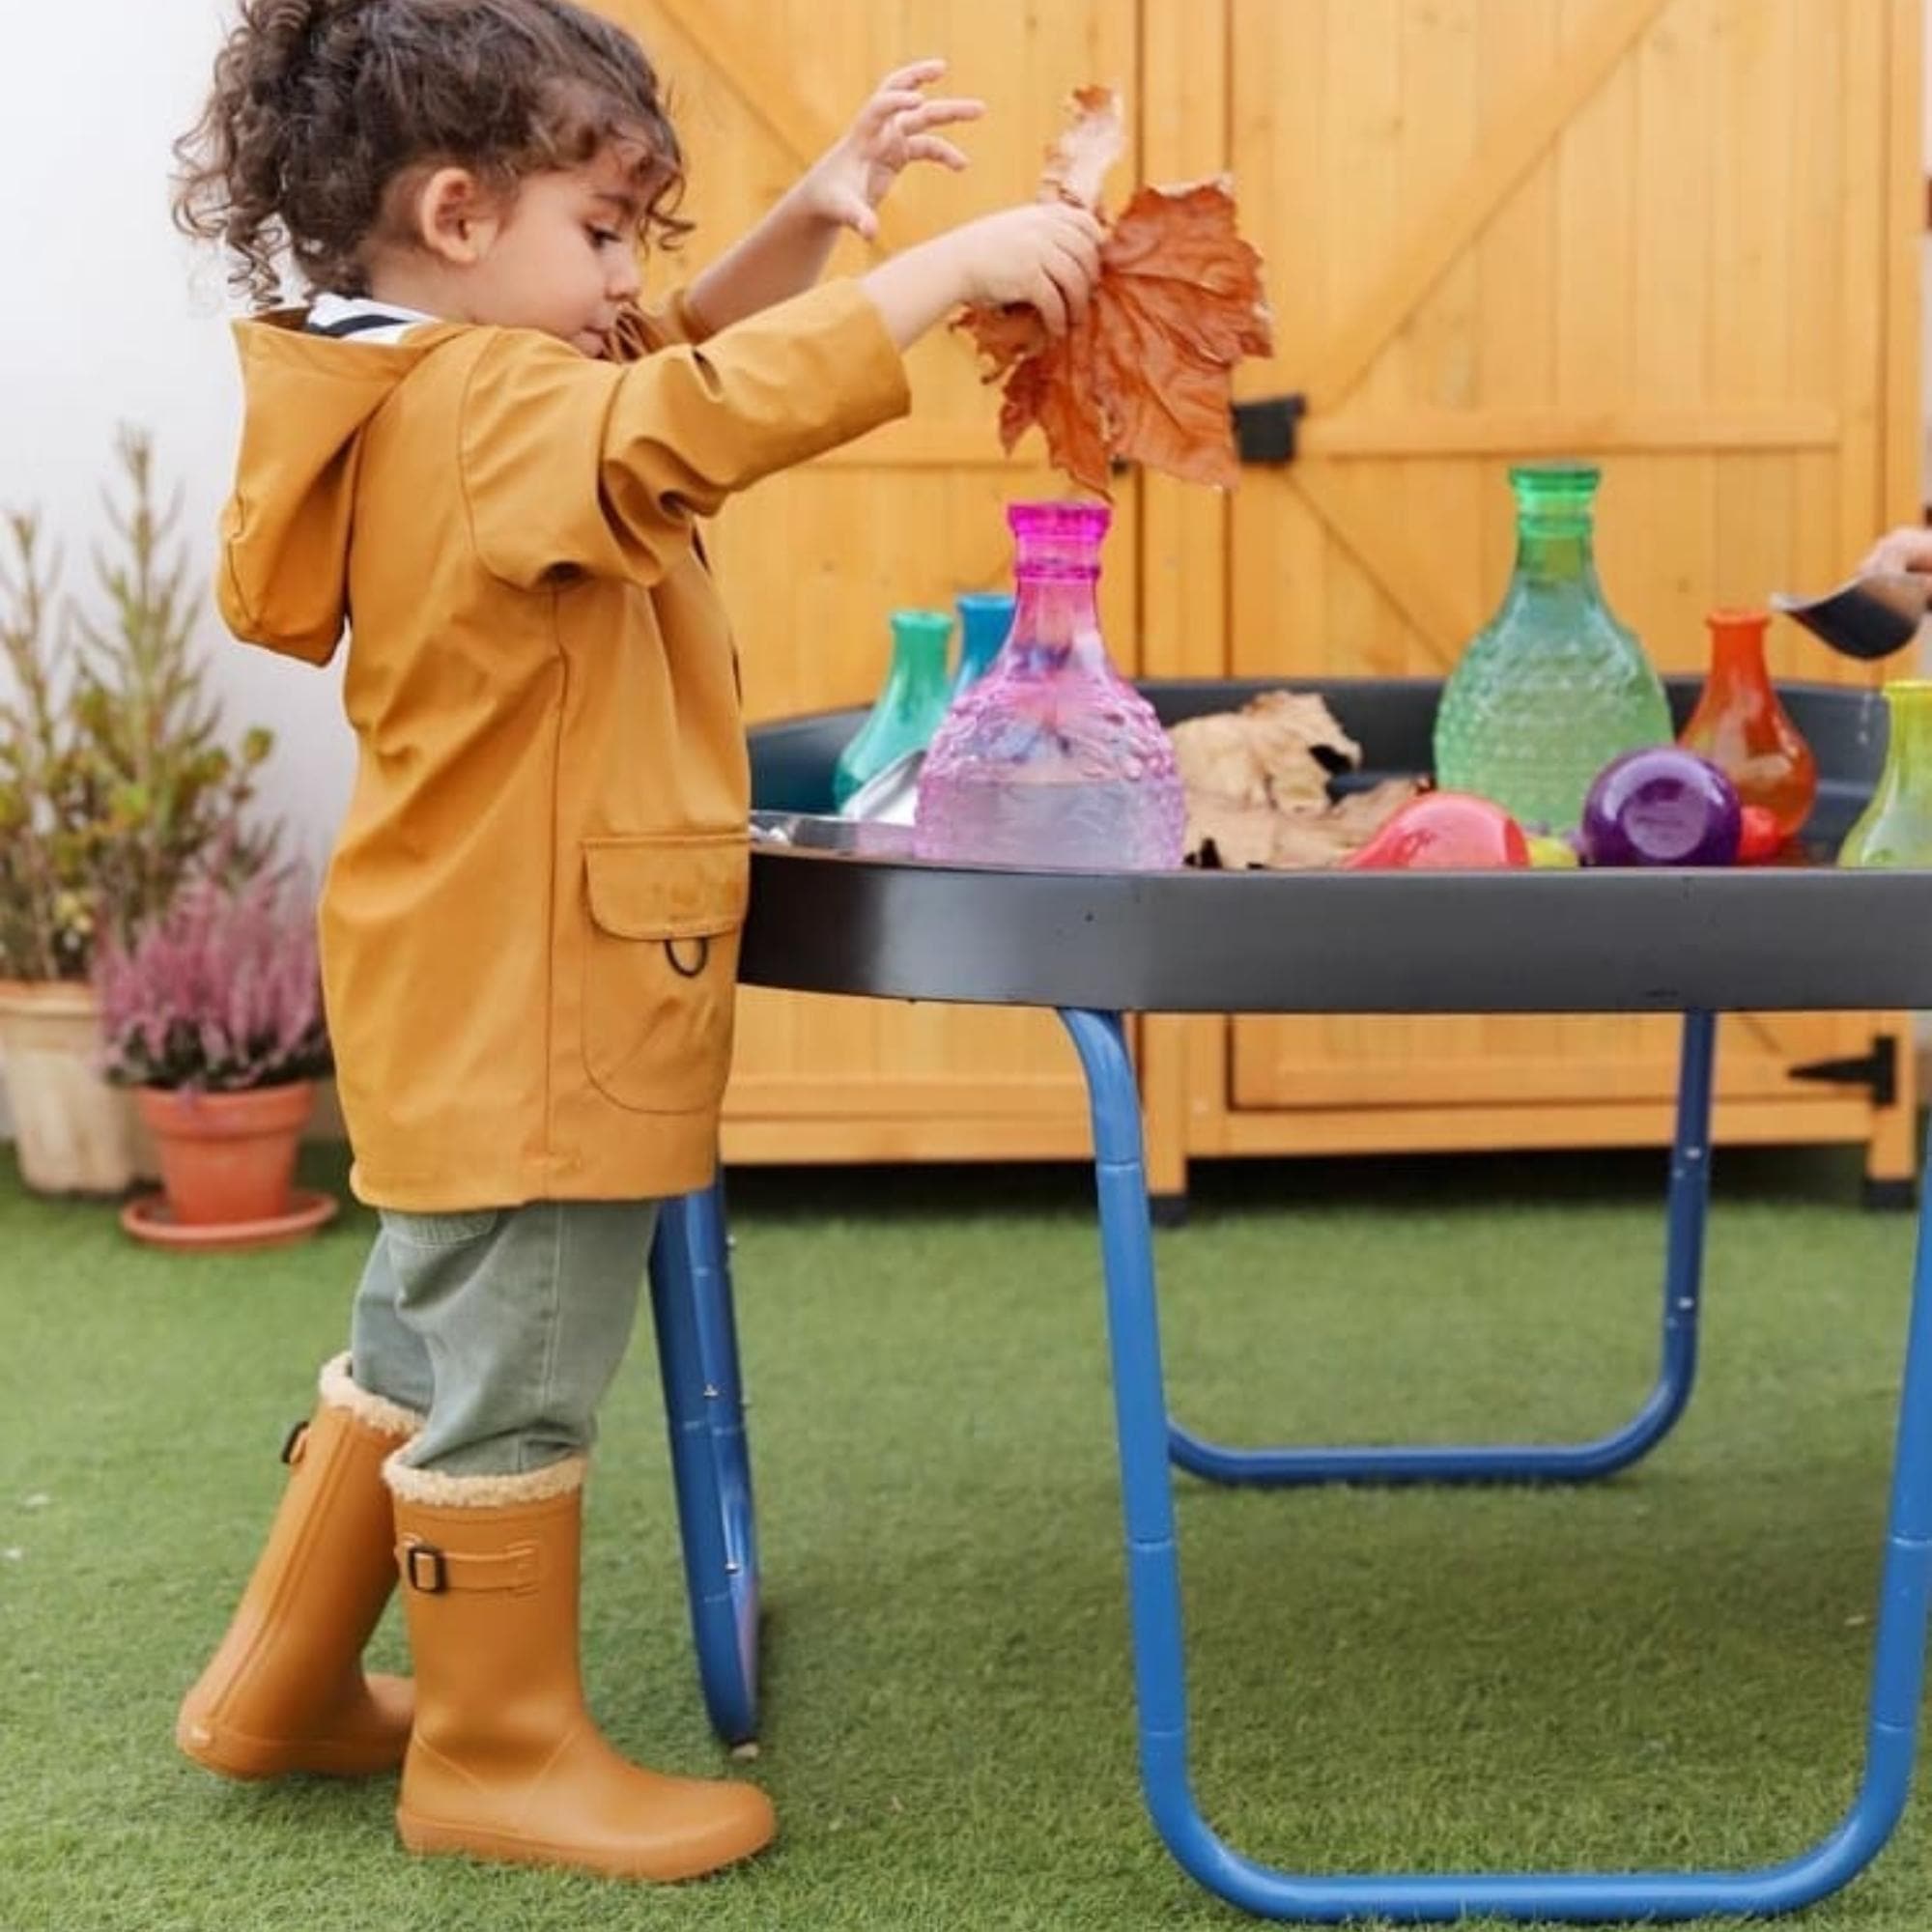 Active Tuff tray and Stand, These versatile tuff spot trays are simply superb and the added benefit of this package is that the Tuff tray comes with an height adjustable stand,making it the complete package to get up and running with your sensory play ideas straight away. The Active World Tuff tray and Stand store away easily after use, you can carry them easily, attach canopies easily to the top holes, and they are extremely durable. Tuff trays and stands have so many uses both indoor and outdoor. Will you